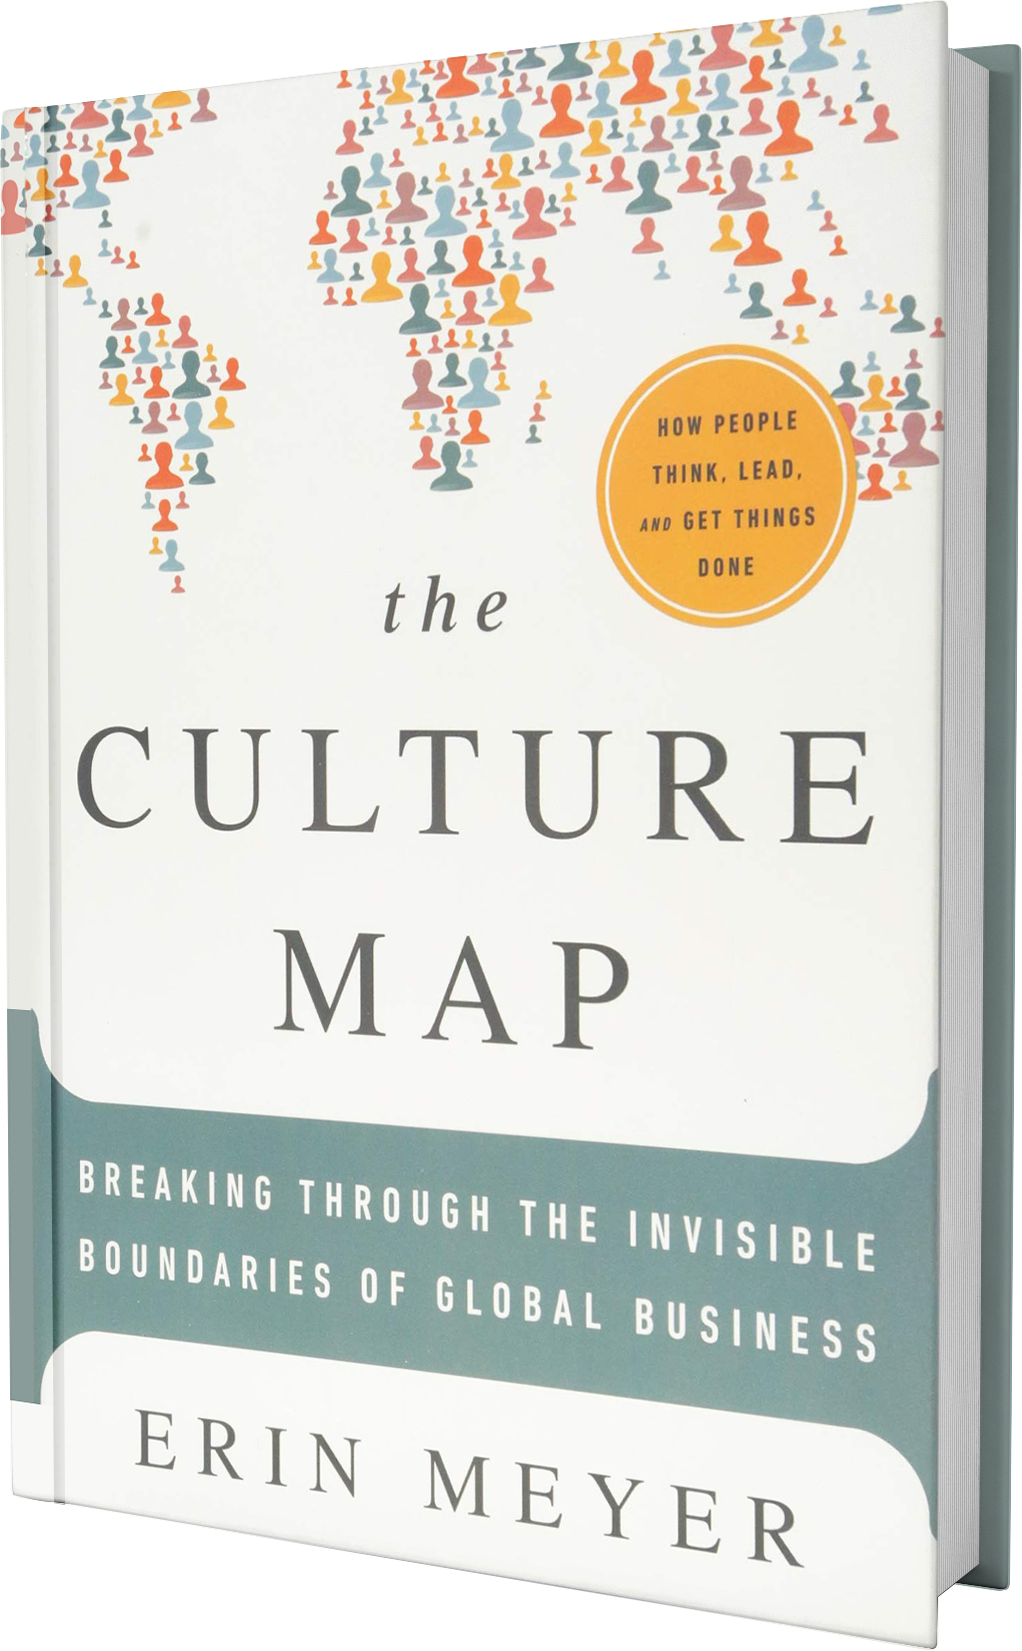 A picture of the book by Erin Meyer, The Culture Map